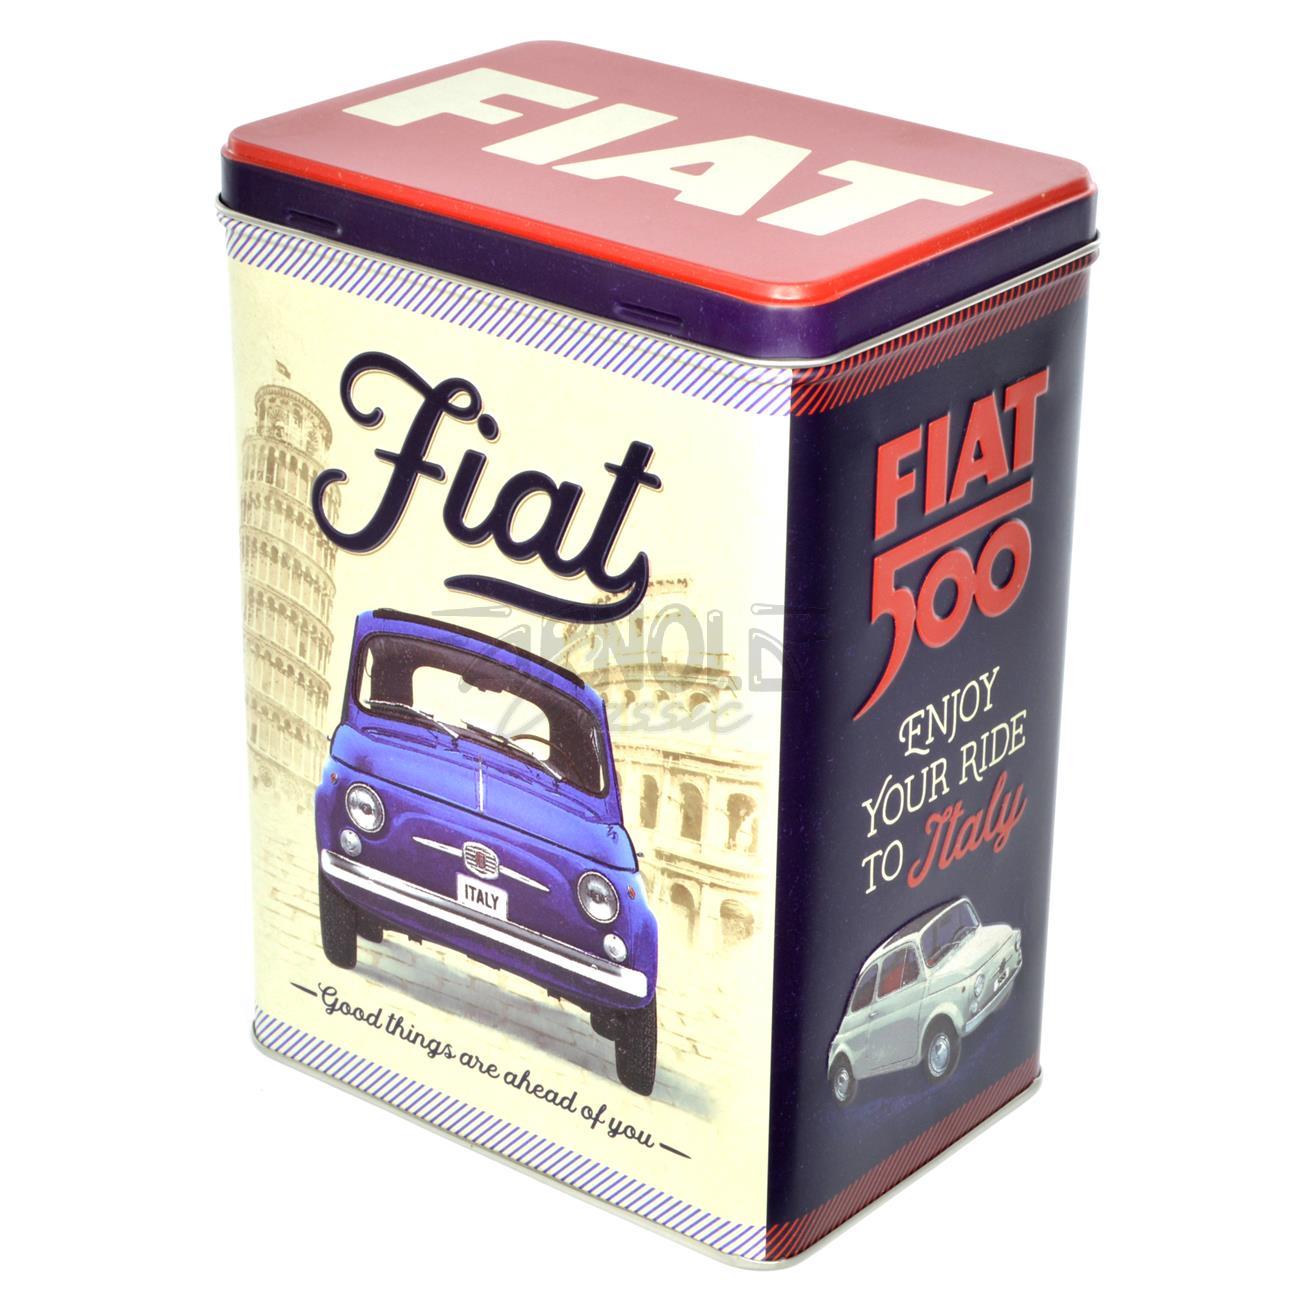 Storage Jar L 'Fiat 500 - Good things are ahead of you